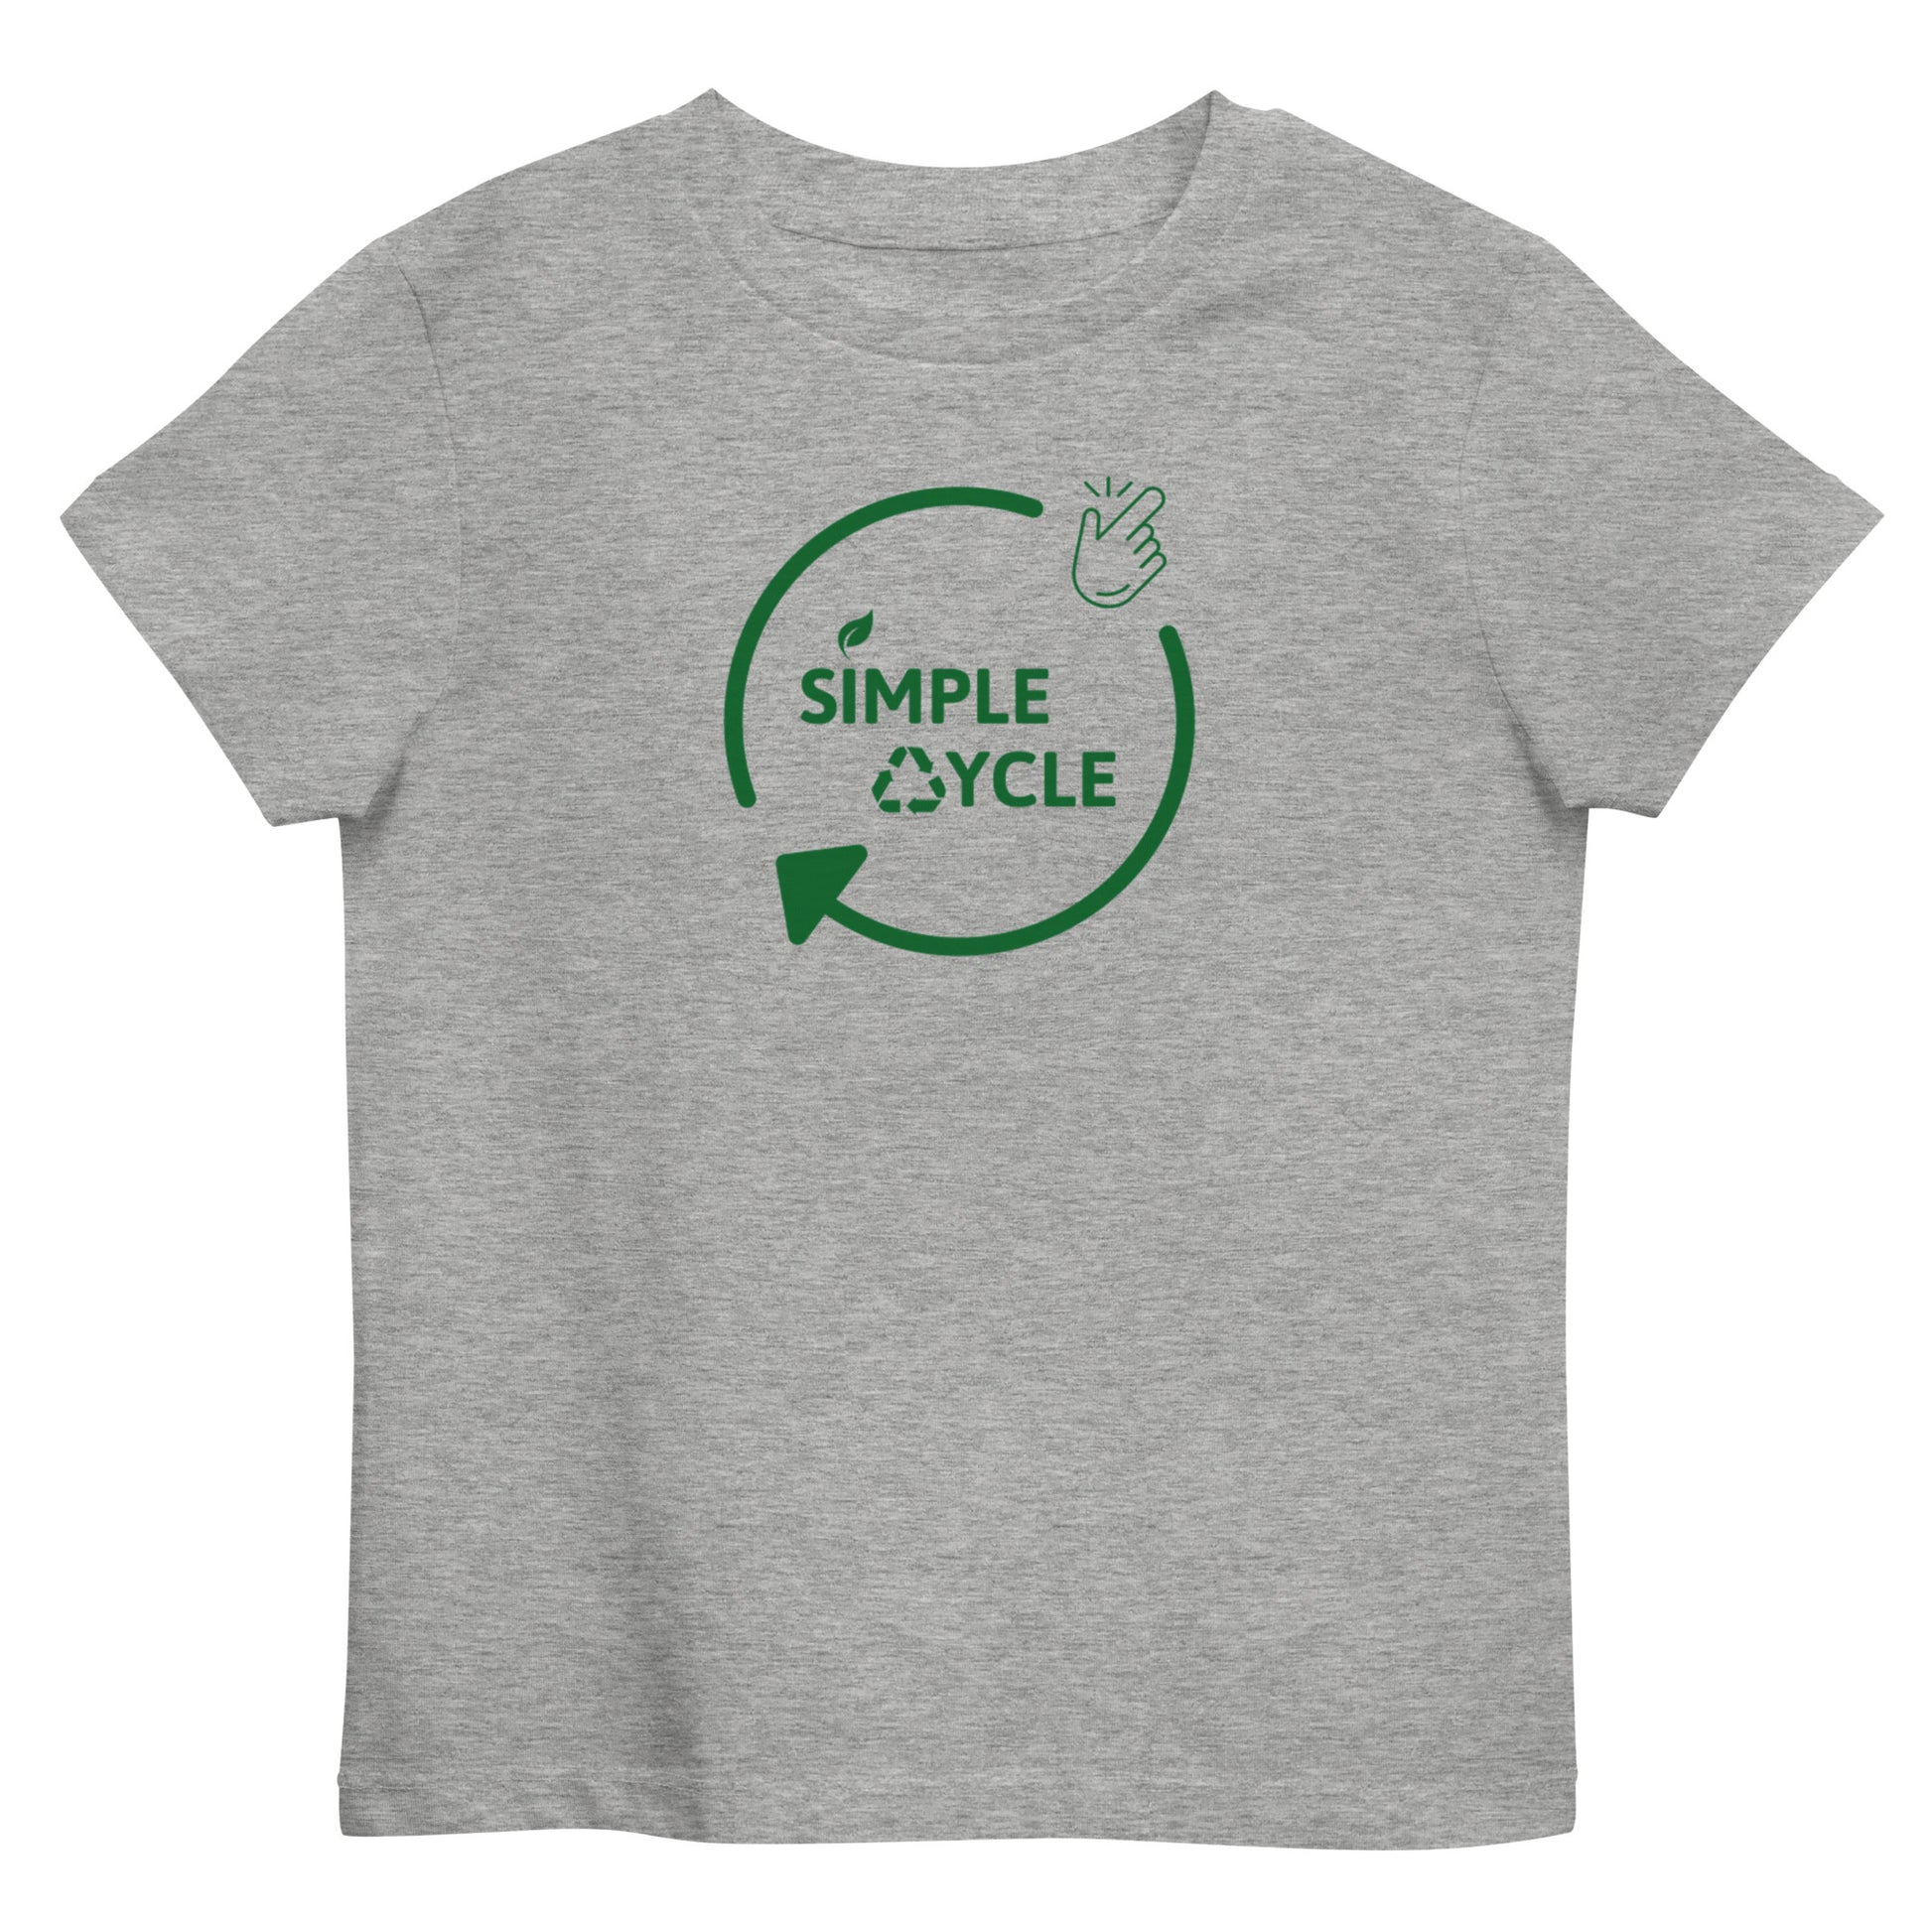 SimpleCycle Organic Cotton Kids T-Shirt grey front view